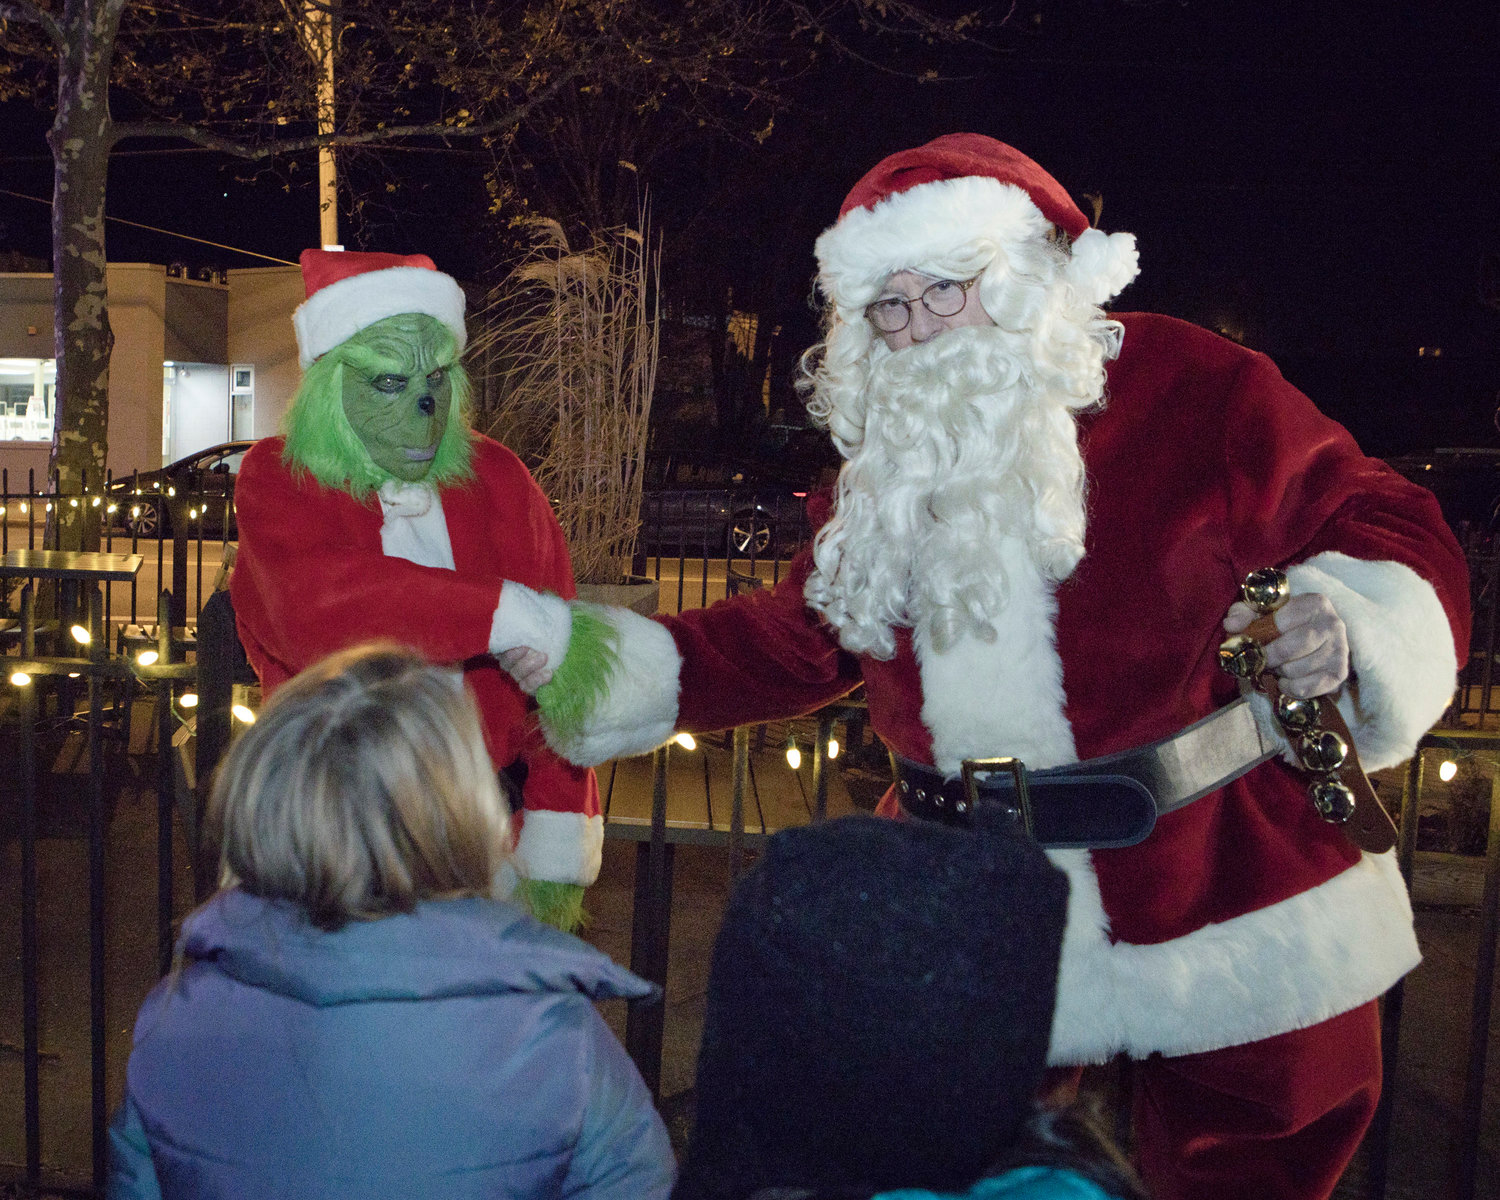 Santa makes a peace offering with the “Grinch” during the Riverside Renaissance MovementTree Lighting, Friday, Dec. 3.